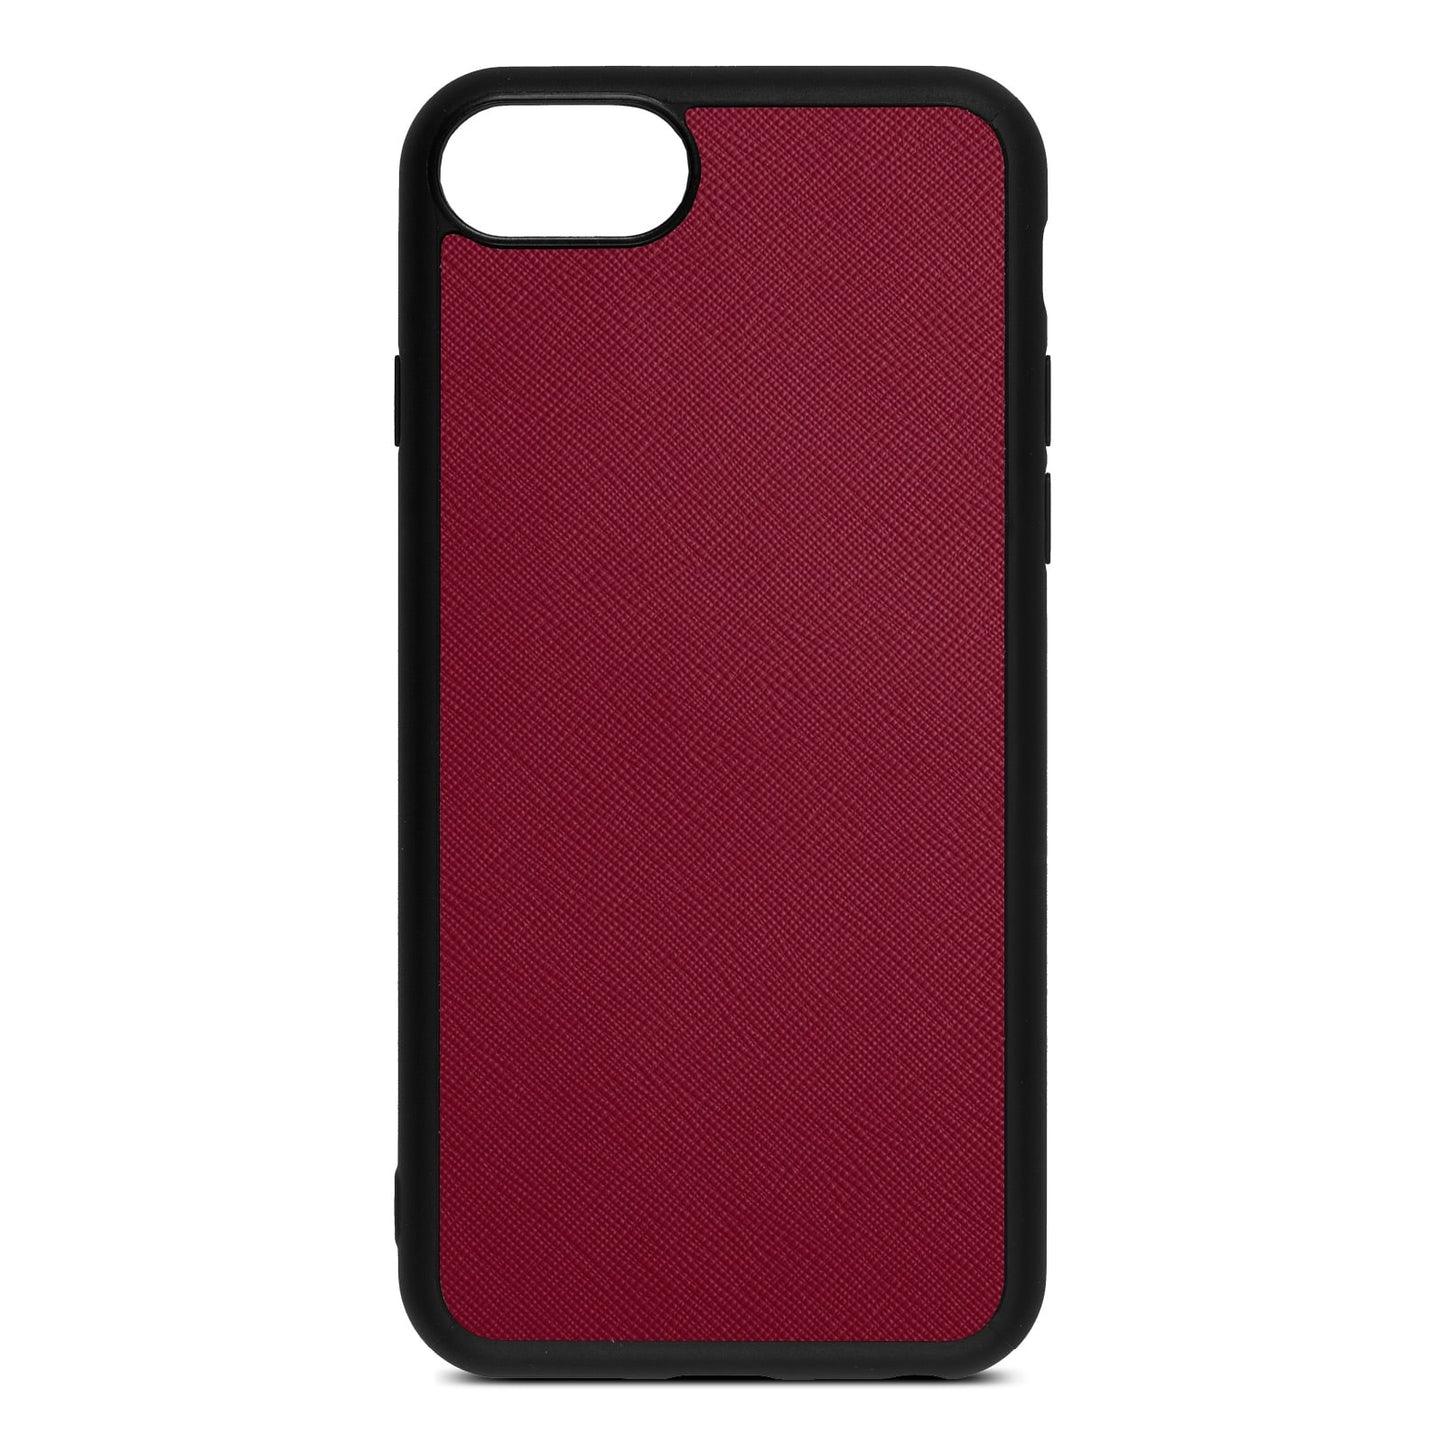 Blank Personalised Dark Red Saffiano Leather iPhone 8 Case